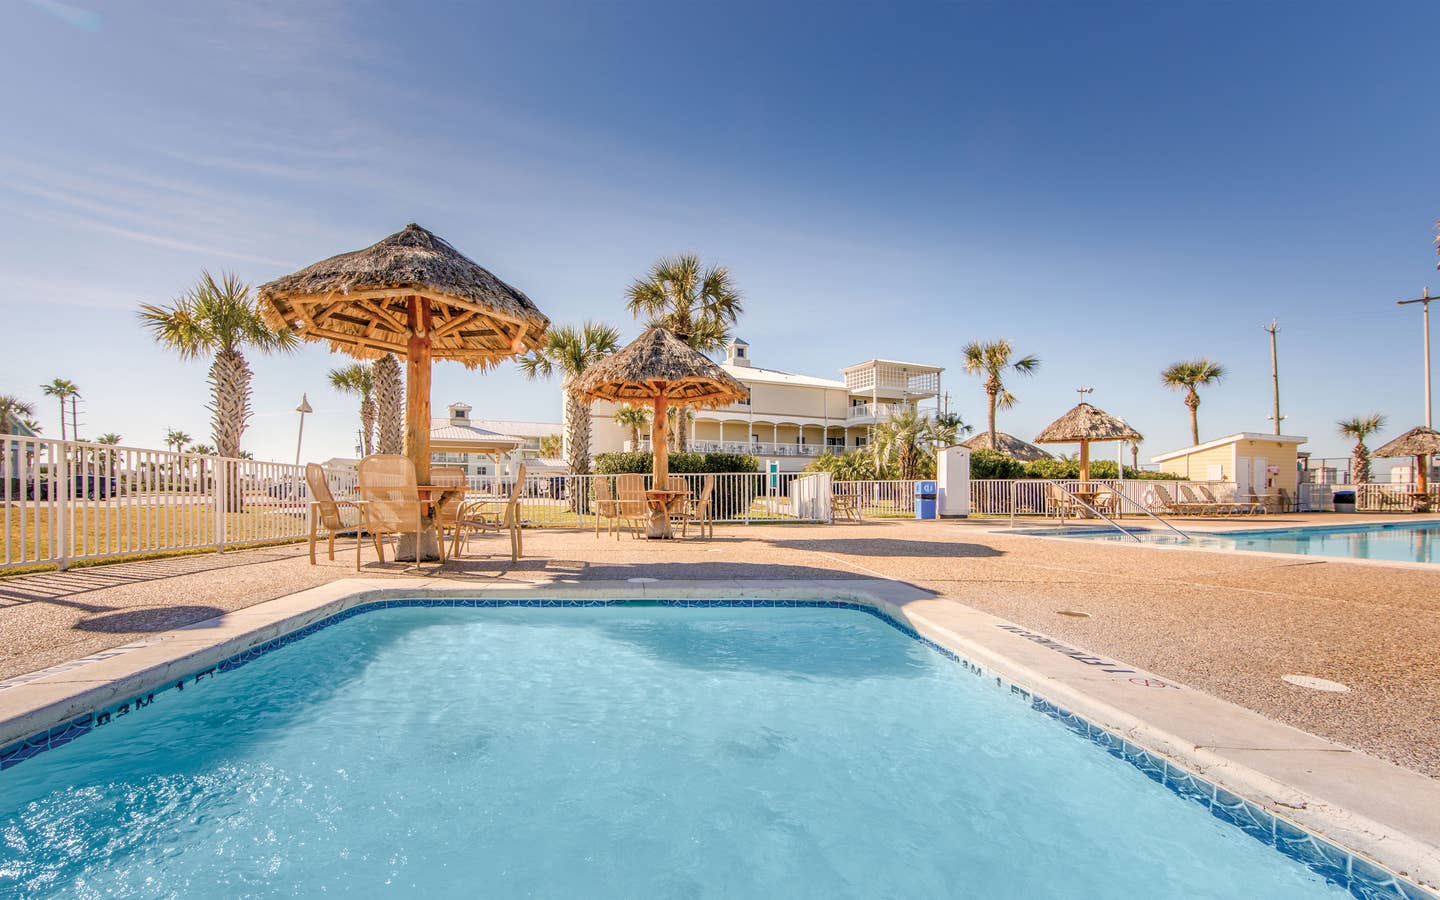 Outdoor pool surrounded by palm trees at Galveston Seaside Resort.